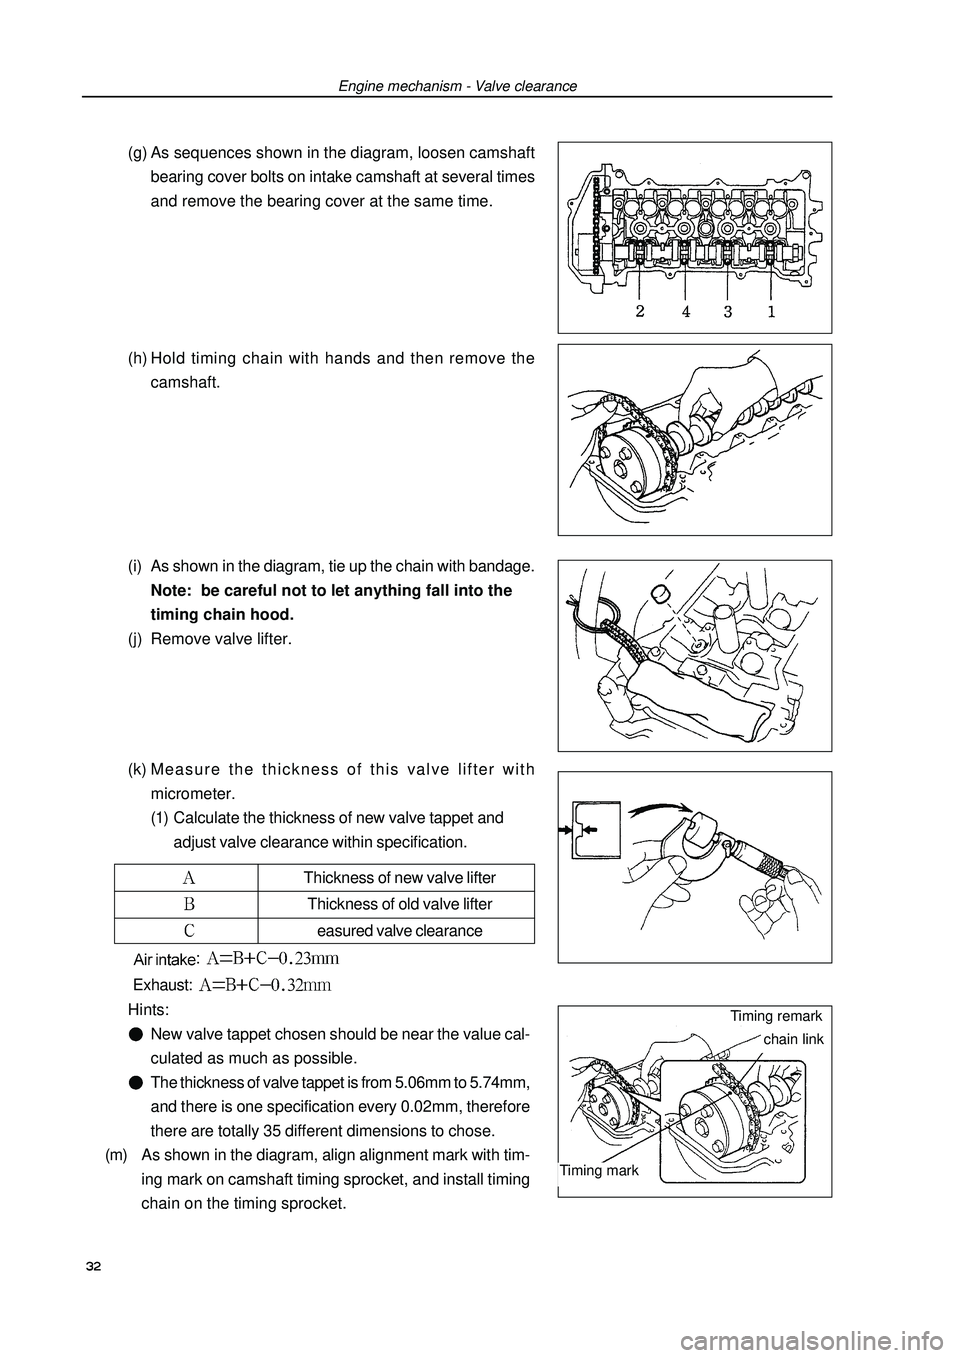 GEELY FC 2008 Service Manual Engine mechanism - Valve clearanceThickness of new valve lifterThickness of old valve liftereasured valve clearance(g) As sequences shown in the diagram, loosen camshaft
bearing cover bolts on intake 